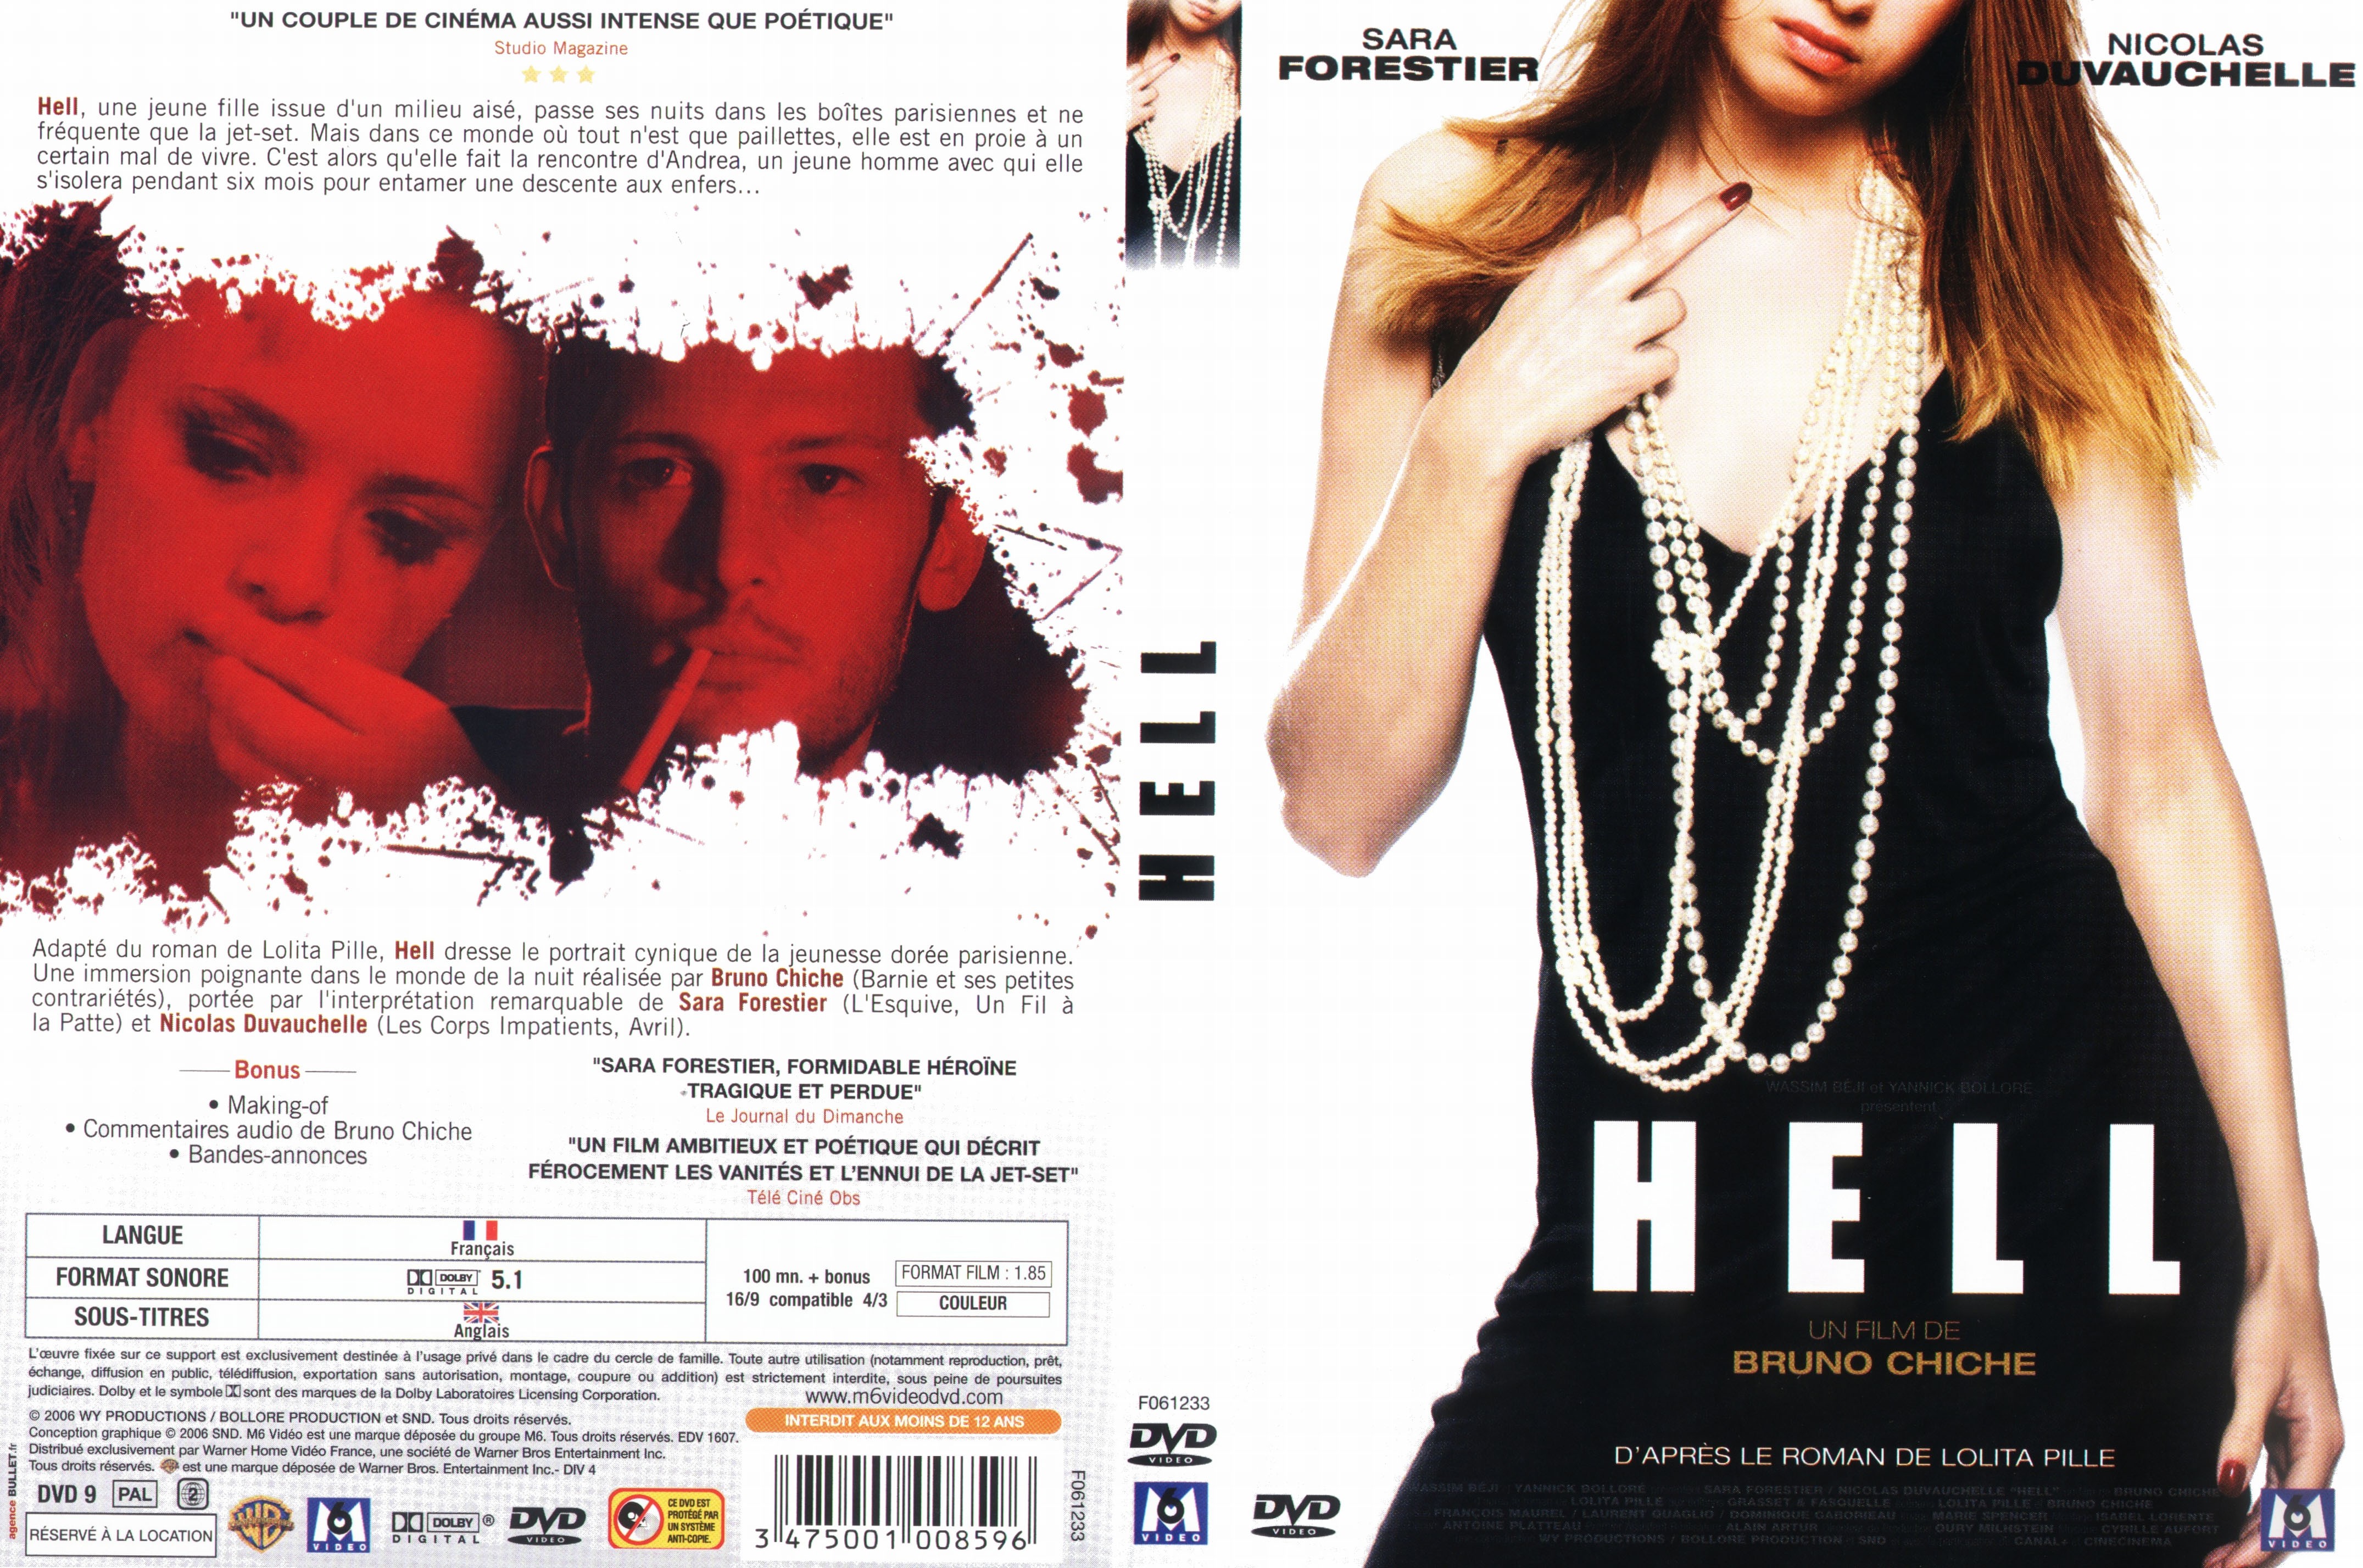 Jaquette DVD Hell